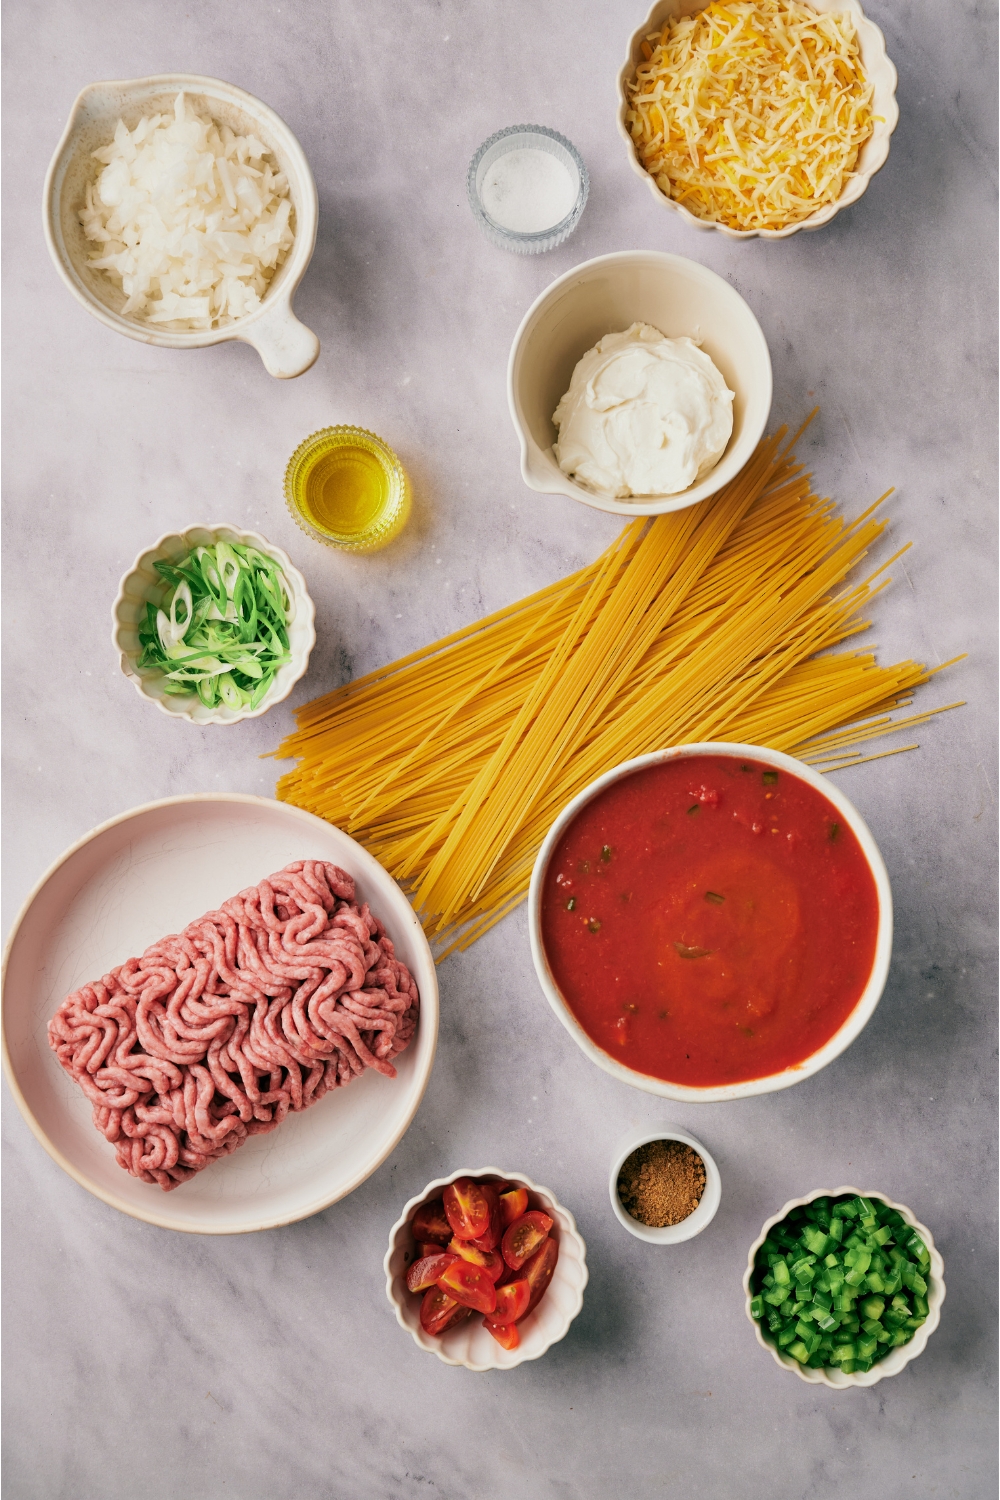 An assortment of ingredients including a pile of dried spaghetti noodles and bowls of tomato sauce, raw ground beef, diced onion, peppers, oil, shredded cheese, and green onion.